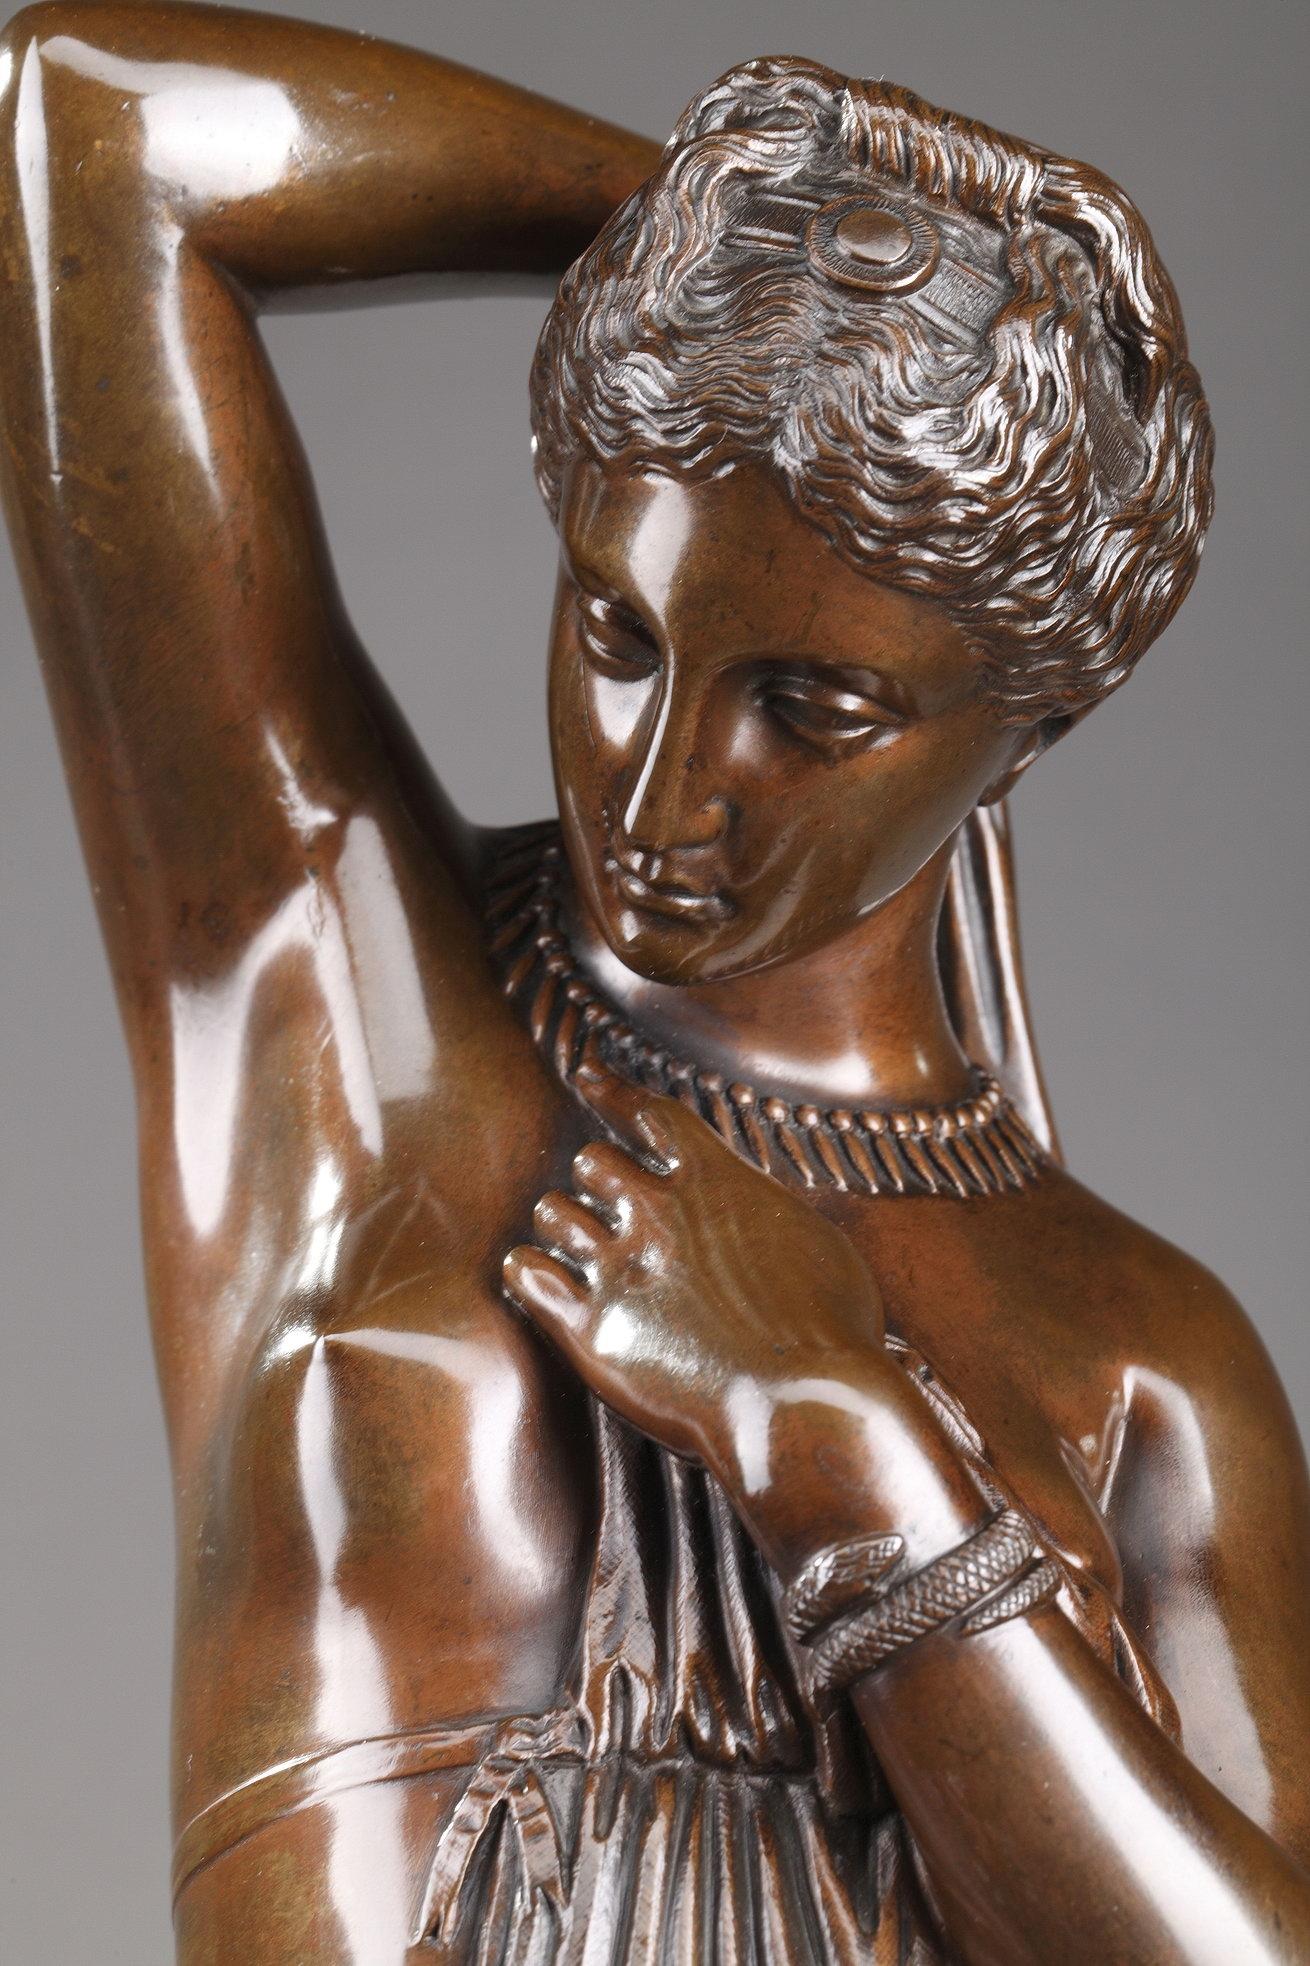 Bronze statuette with brown patina featuring the graceful Phryne, a legendary courtesan in ancient Greece put on trial for impiety. Phryne was acquitted after her defender Hypereides removed her robe and exposed her naked body to the jury. Our